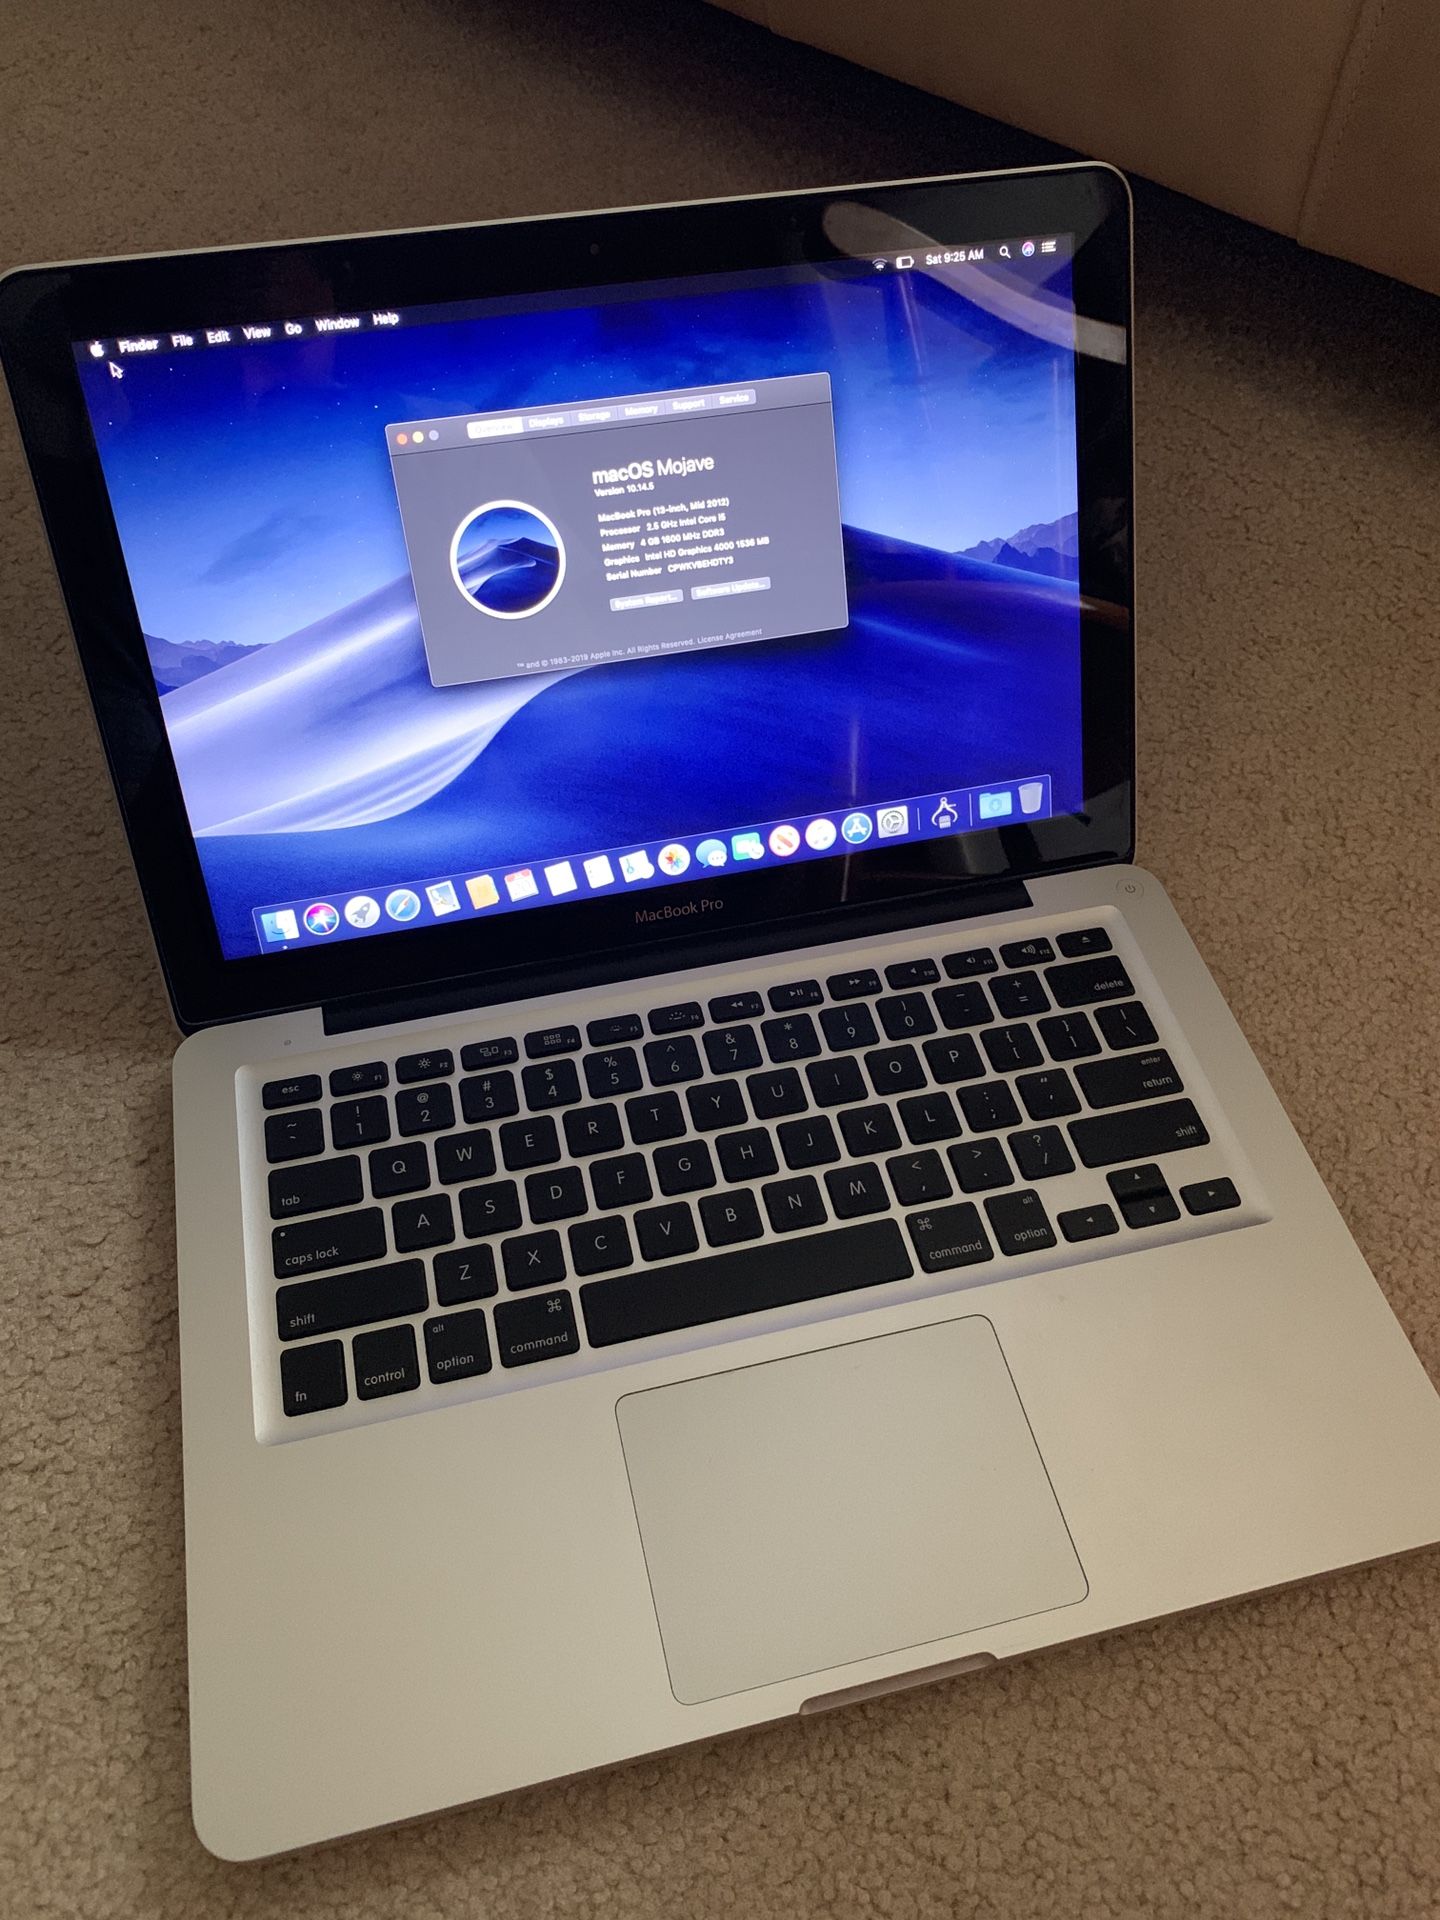 MacBook Pro 13” i5/4/240gb with Microsoft office 2016